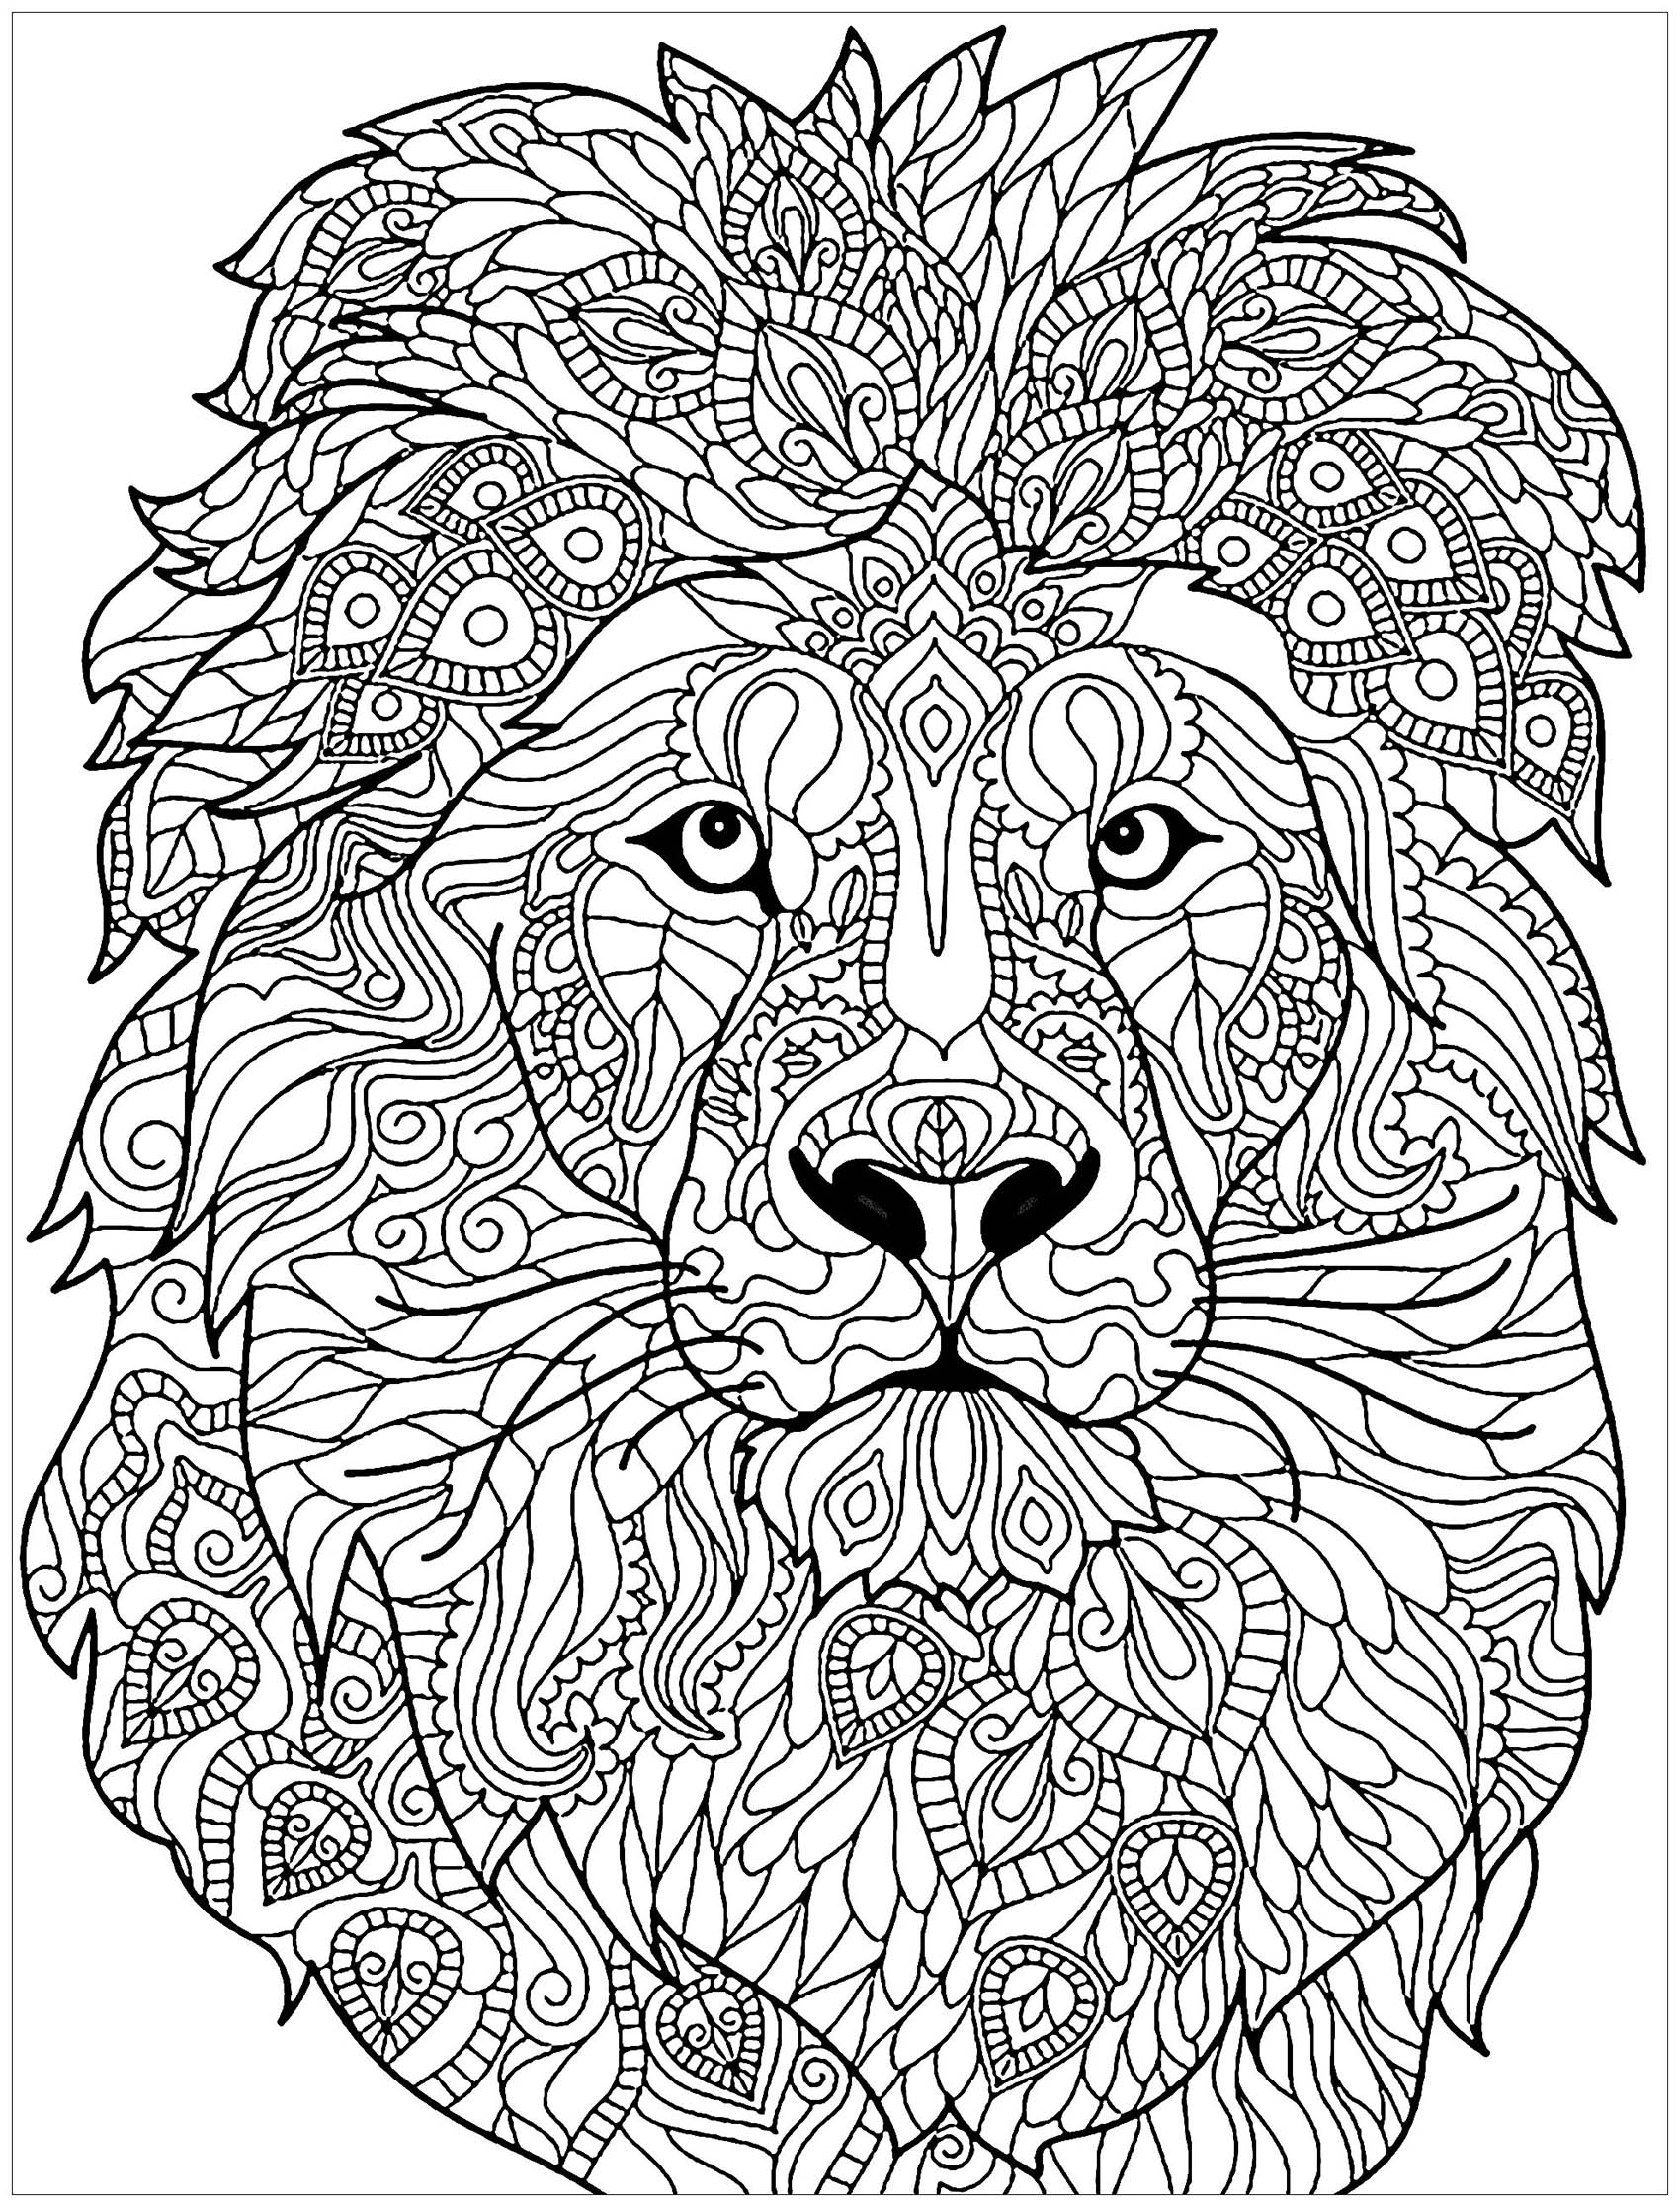 Lion head with complex patterns to color - Lion Kids Coloring Pages